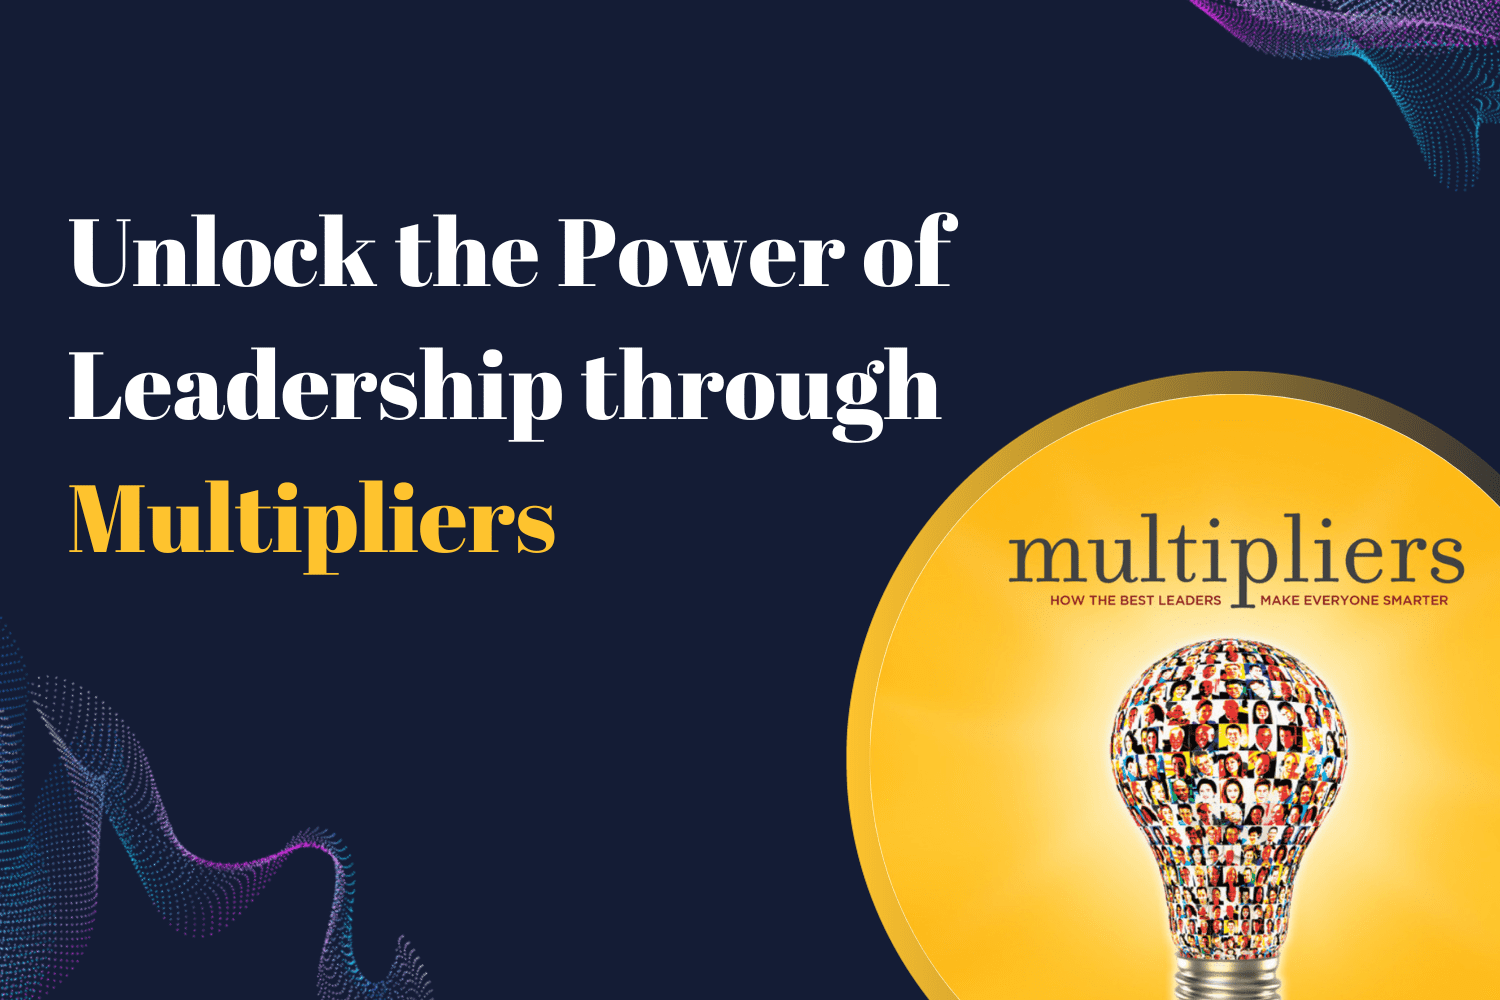 unlock the power of leadership through multipliers with biz group a leading training company in UAE and KSA